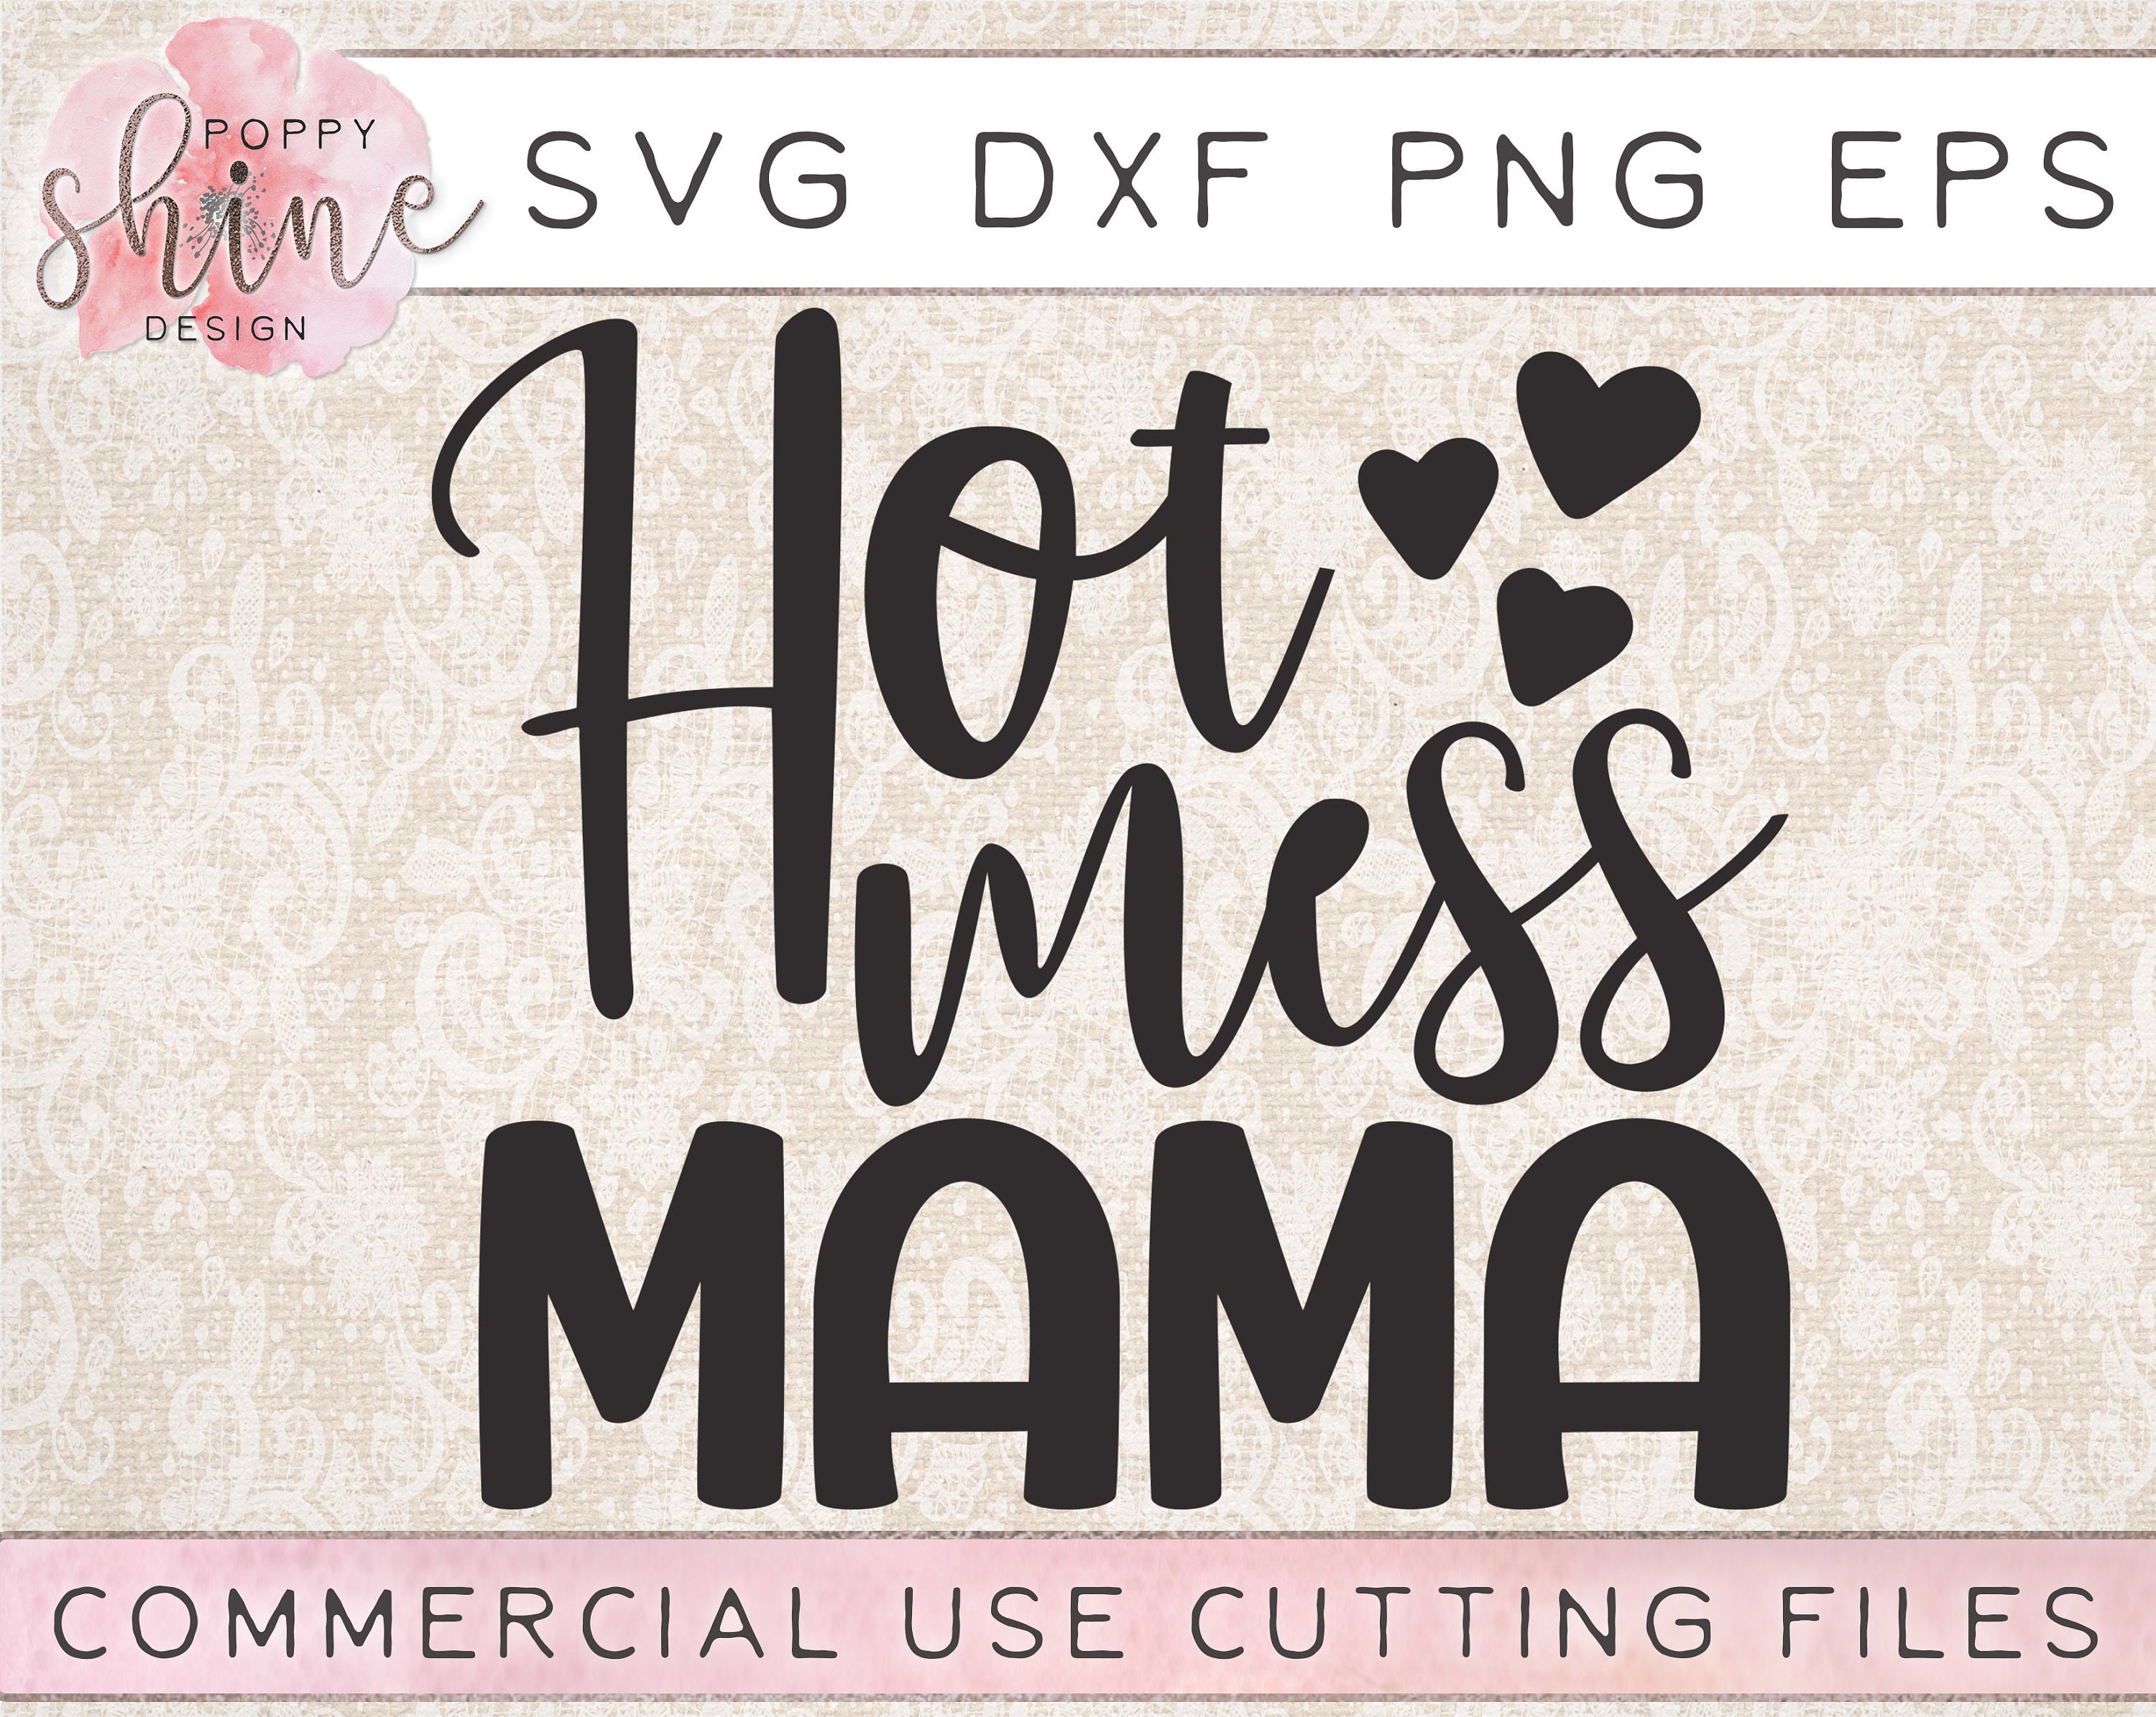 Hot Mess Mama svg png eps dxf Cutting File for Cricut & Silhouette, Fun...